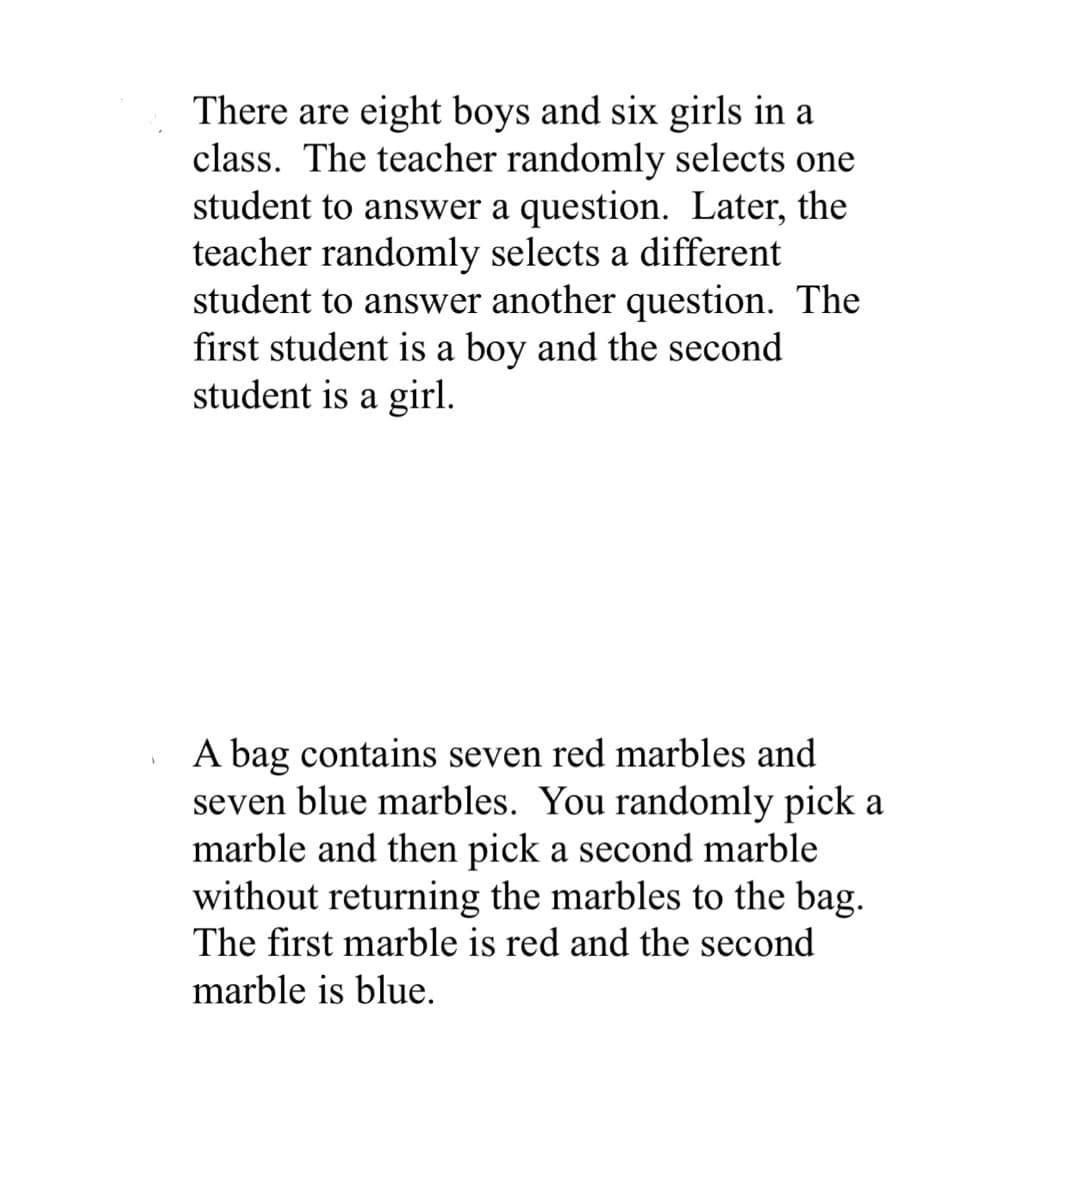 There are eight boys and six girls in a
class. The teacher randomly selects one
student to answer a question. Later, the
teacher randomly selects a different
student to answer another question. The
first student is a boy and the second
student is a girl.
A bag contains seven red marbles and
seven blue marbles. You randomly pick a
marble and then pick a second marble
without returning the marbles to the bag.
The first marble is red and the second
marble is blue.
